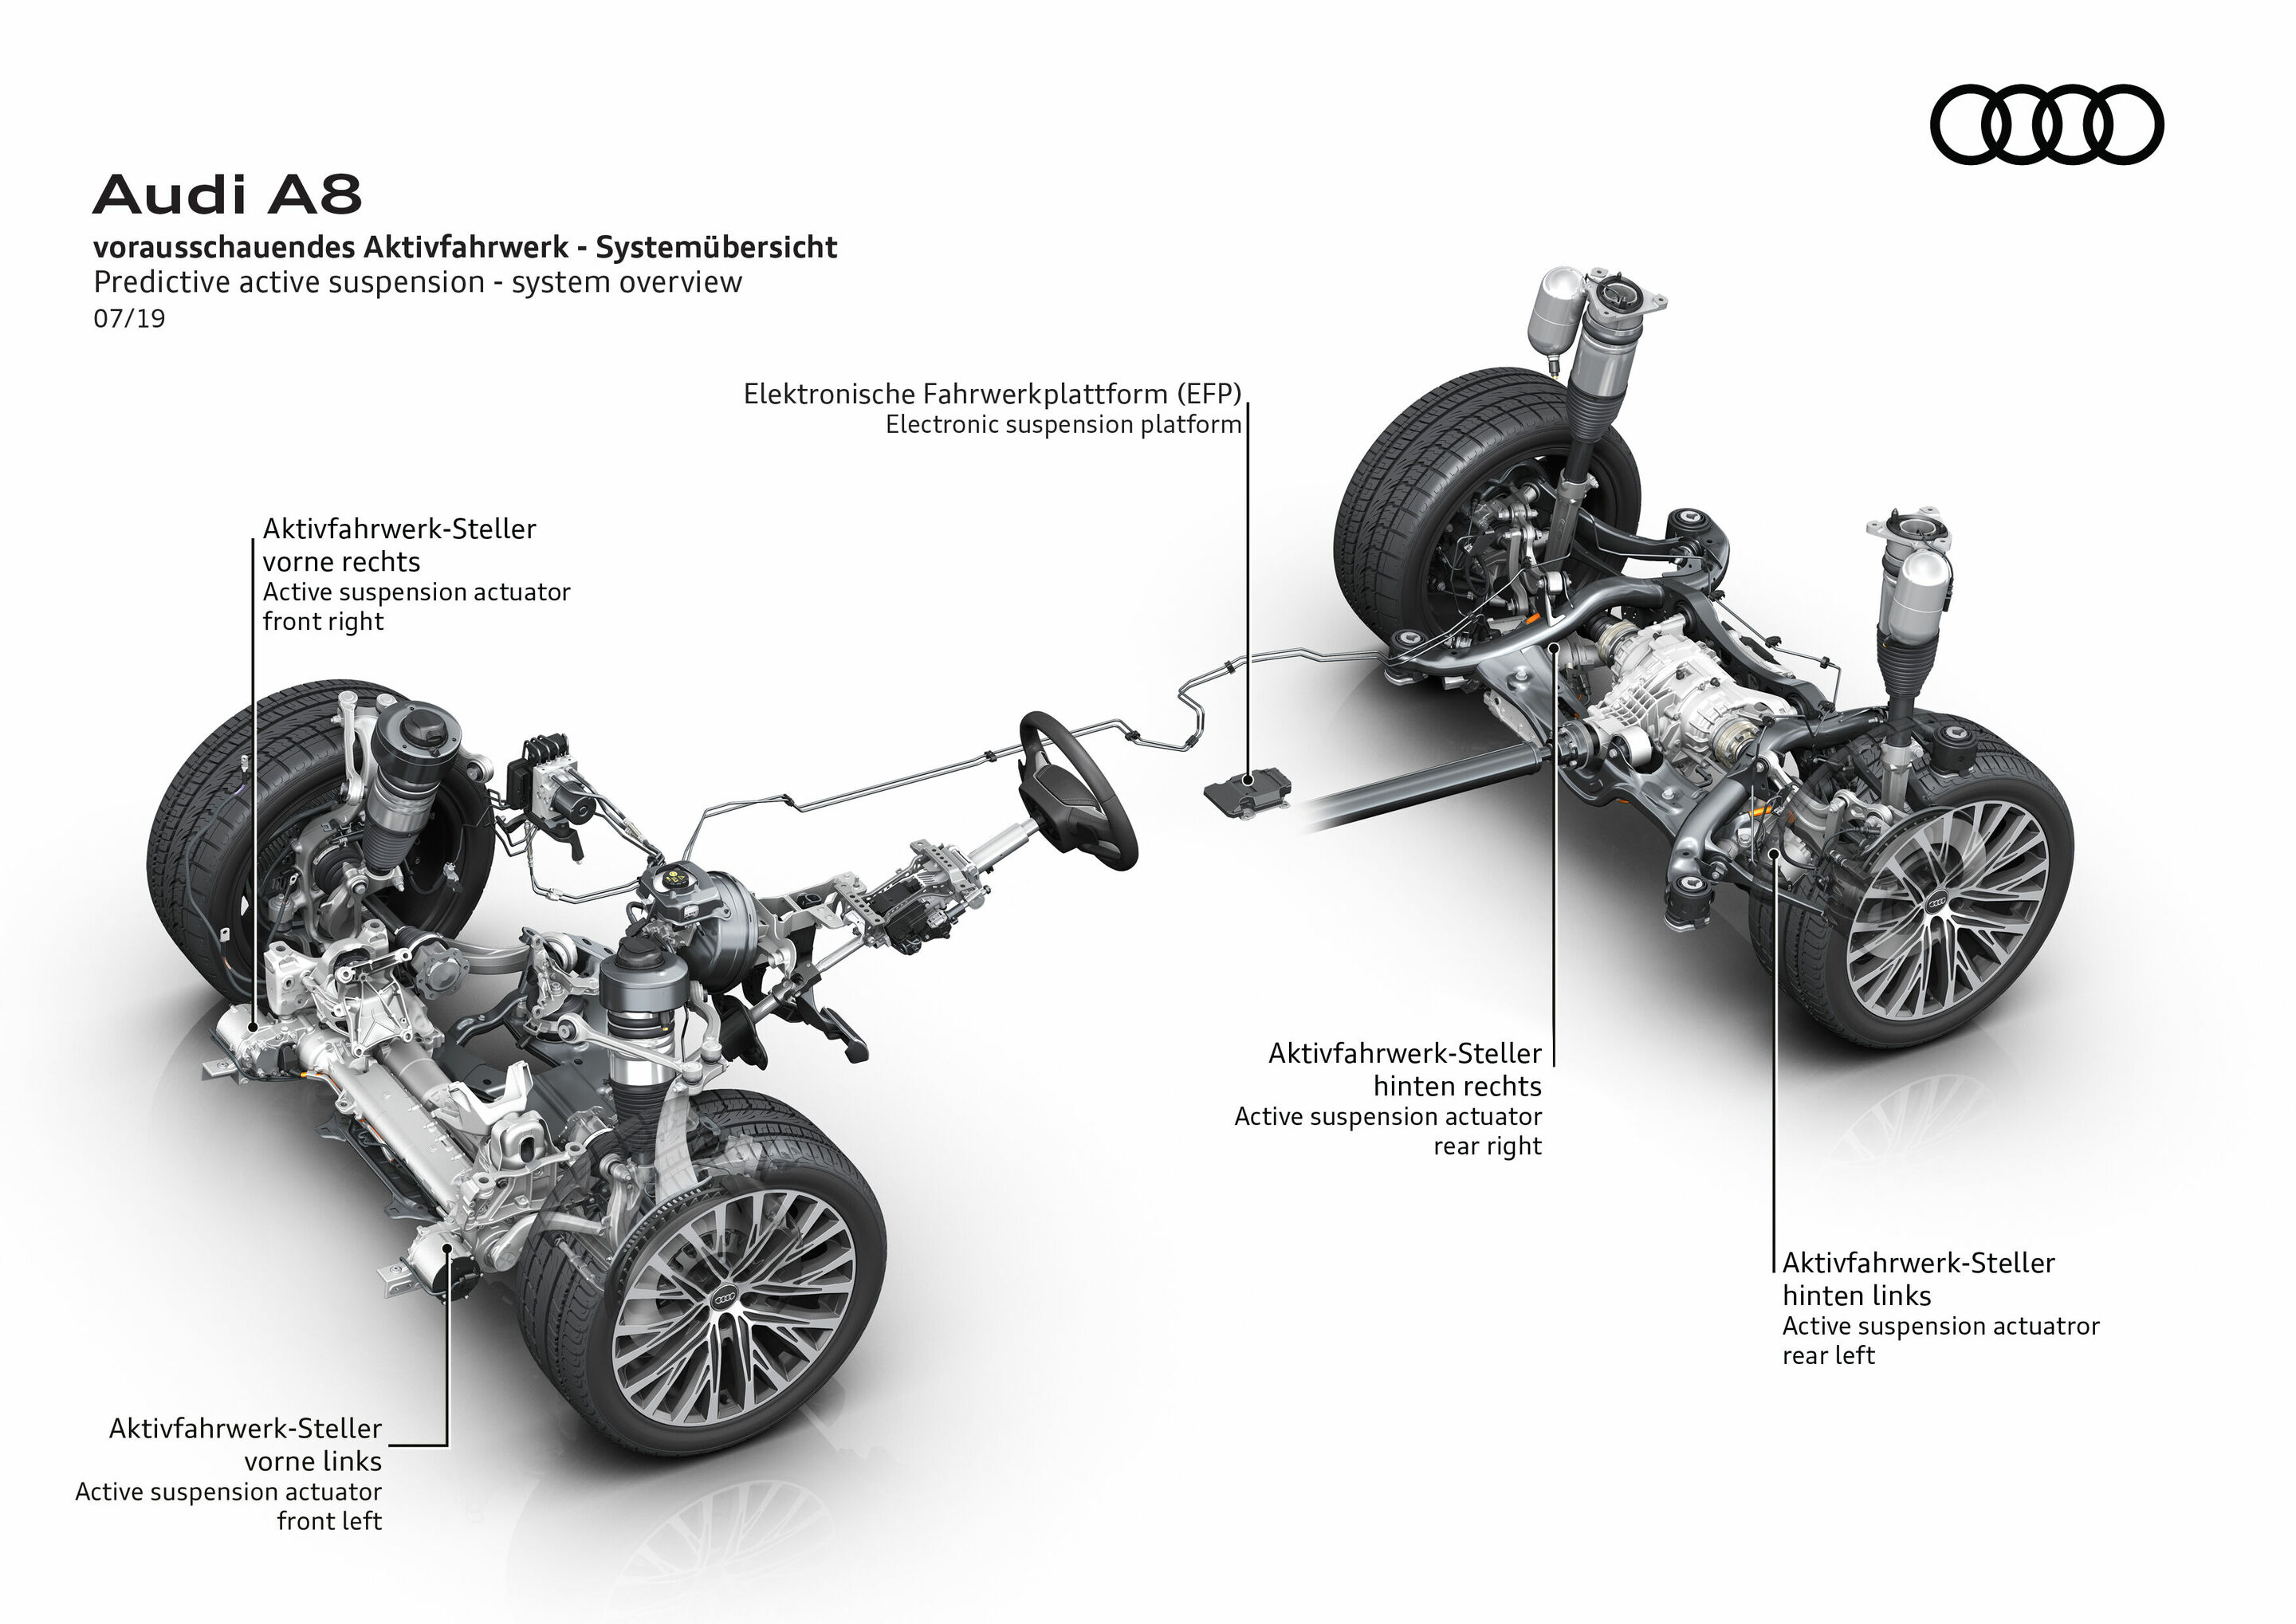 Multifaceted personality: predictive active suspension in the A8 flagship  model